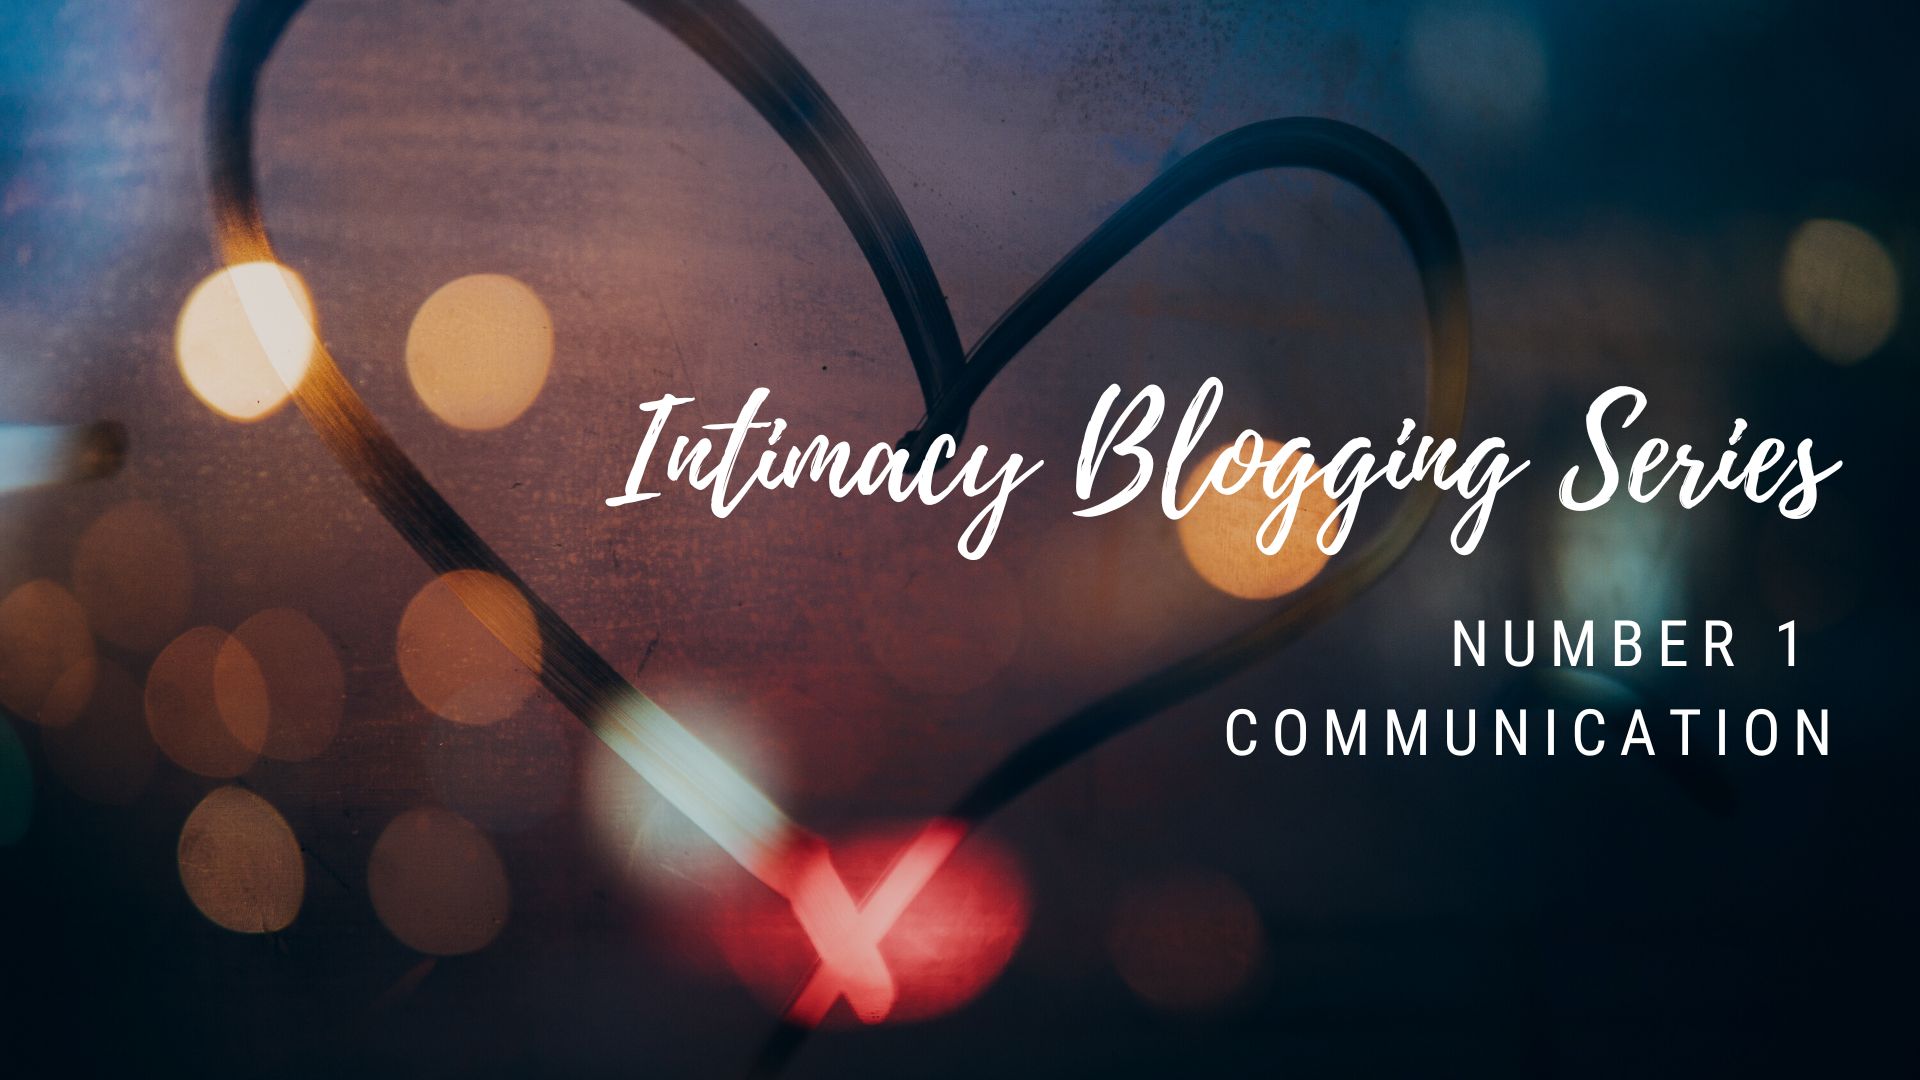 Intimacy blogging series number 1 communication